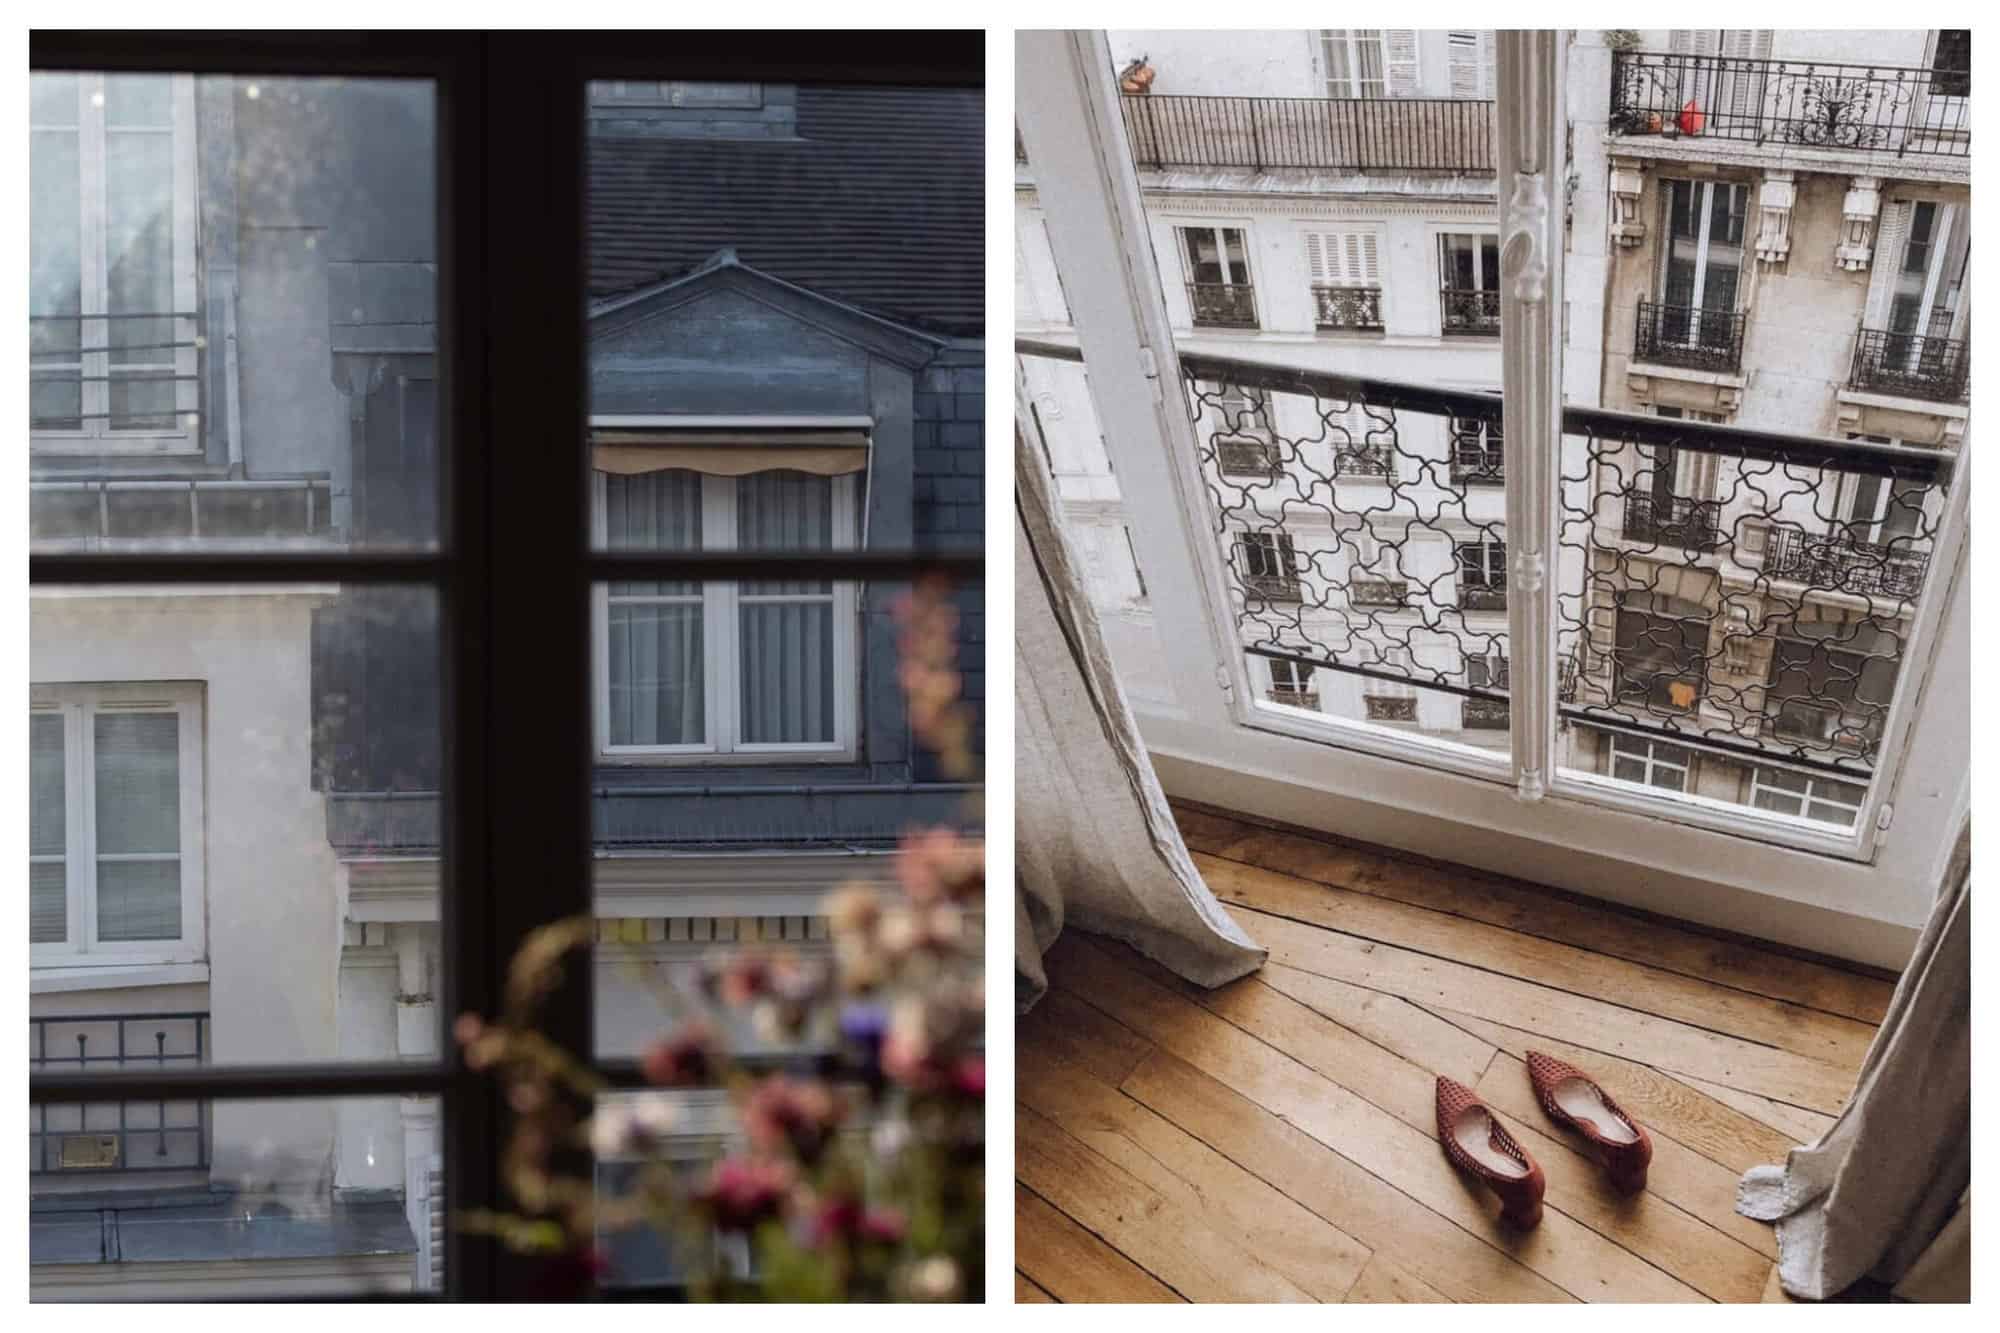 Left: The photo is taken from within an apartment, facing a traditional Parisian building. The panels of the window are visible in the shot, as well as some flowers out of focus in front. Right: A photo of the floorboards in a Parisian apartment, with a pair of closed toed heels on the floor. The view from outside the window is also visible, with traditional Parisian apartments outside. 